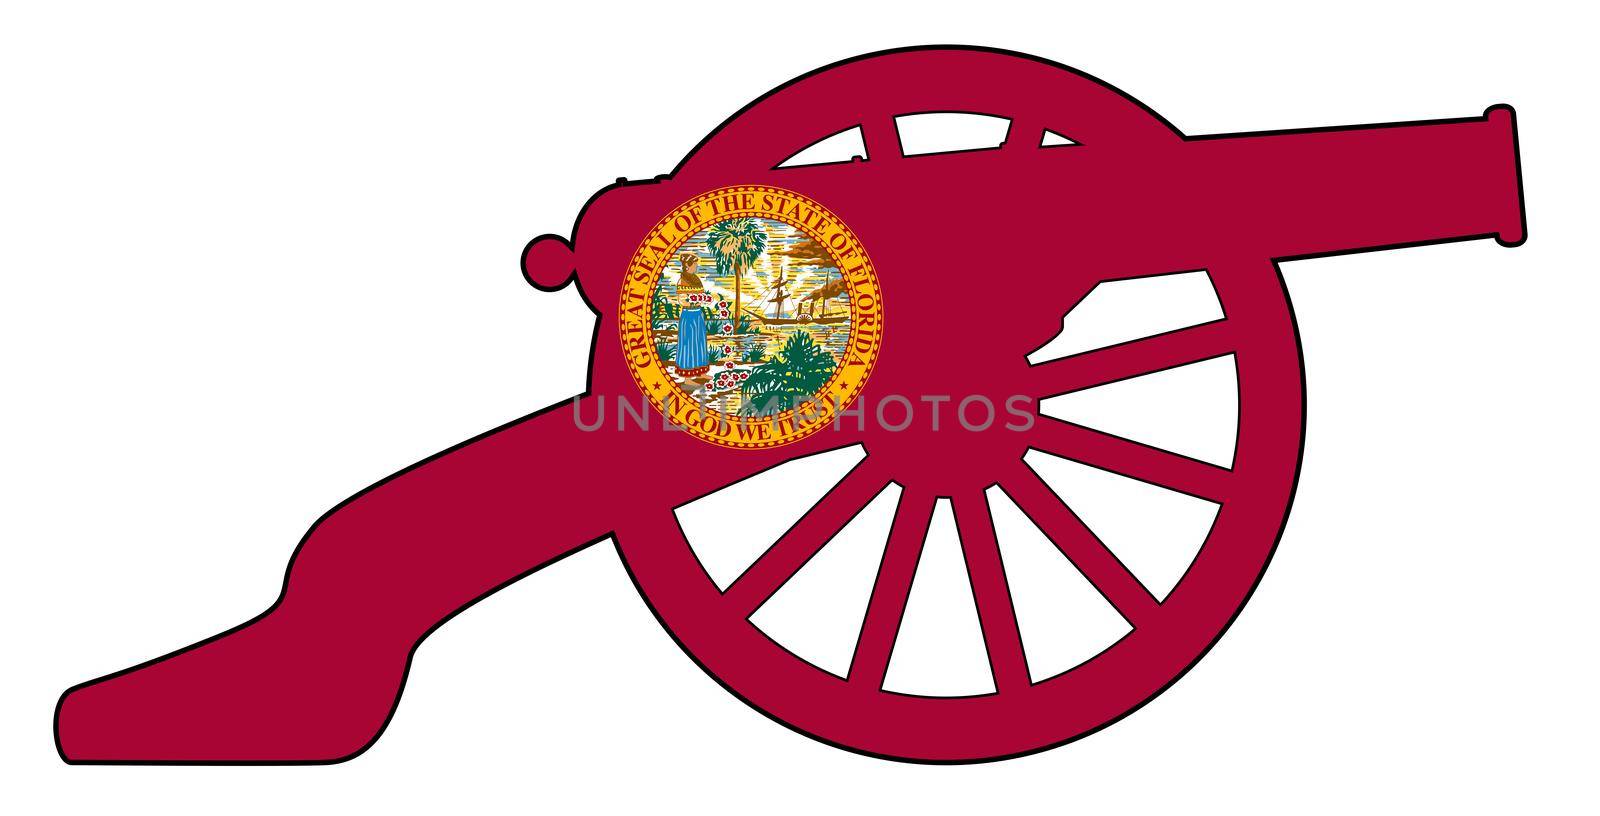 Typical American civil war cannon gun with Florida state flag icon isolated on a white background